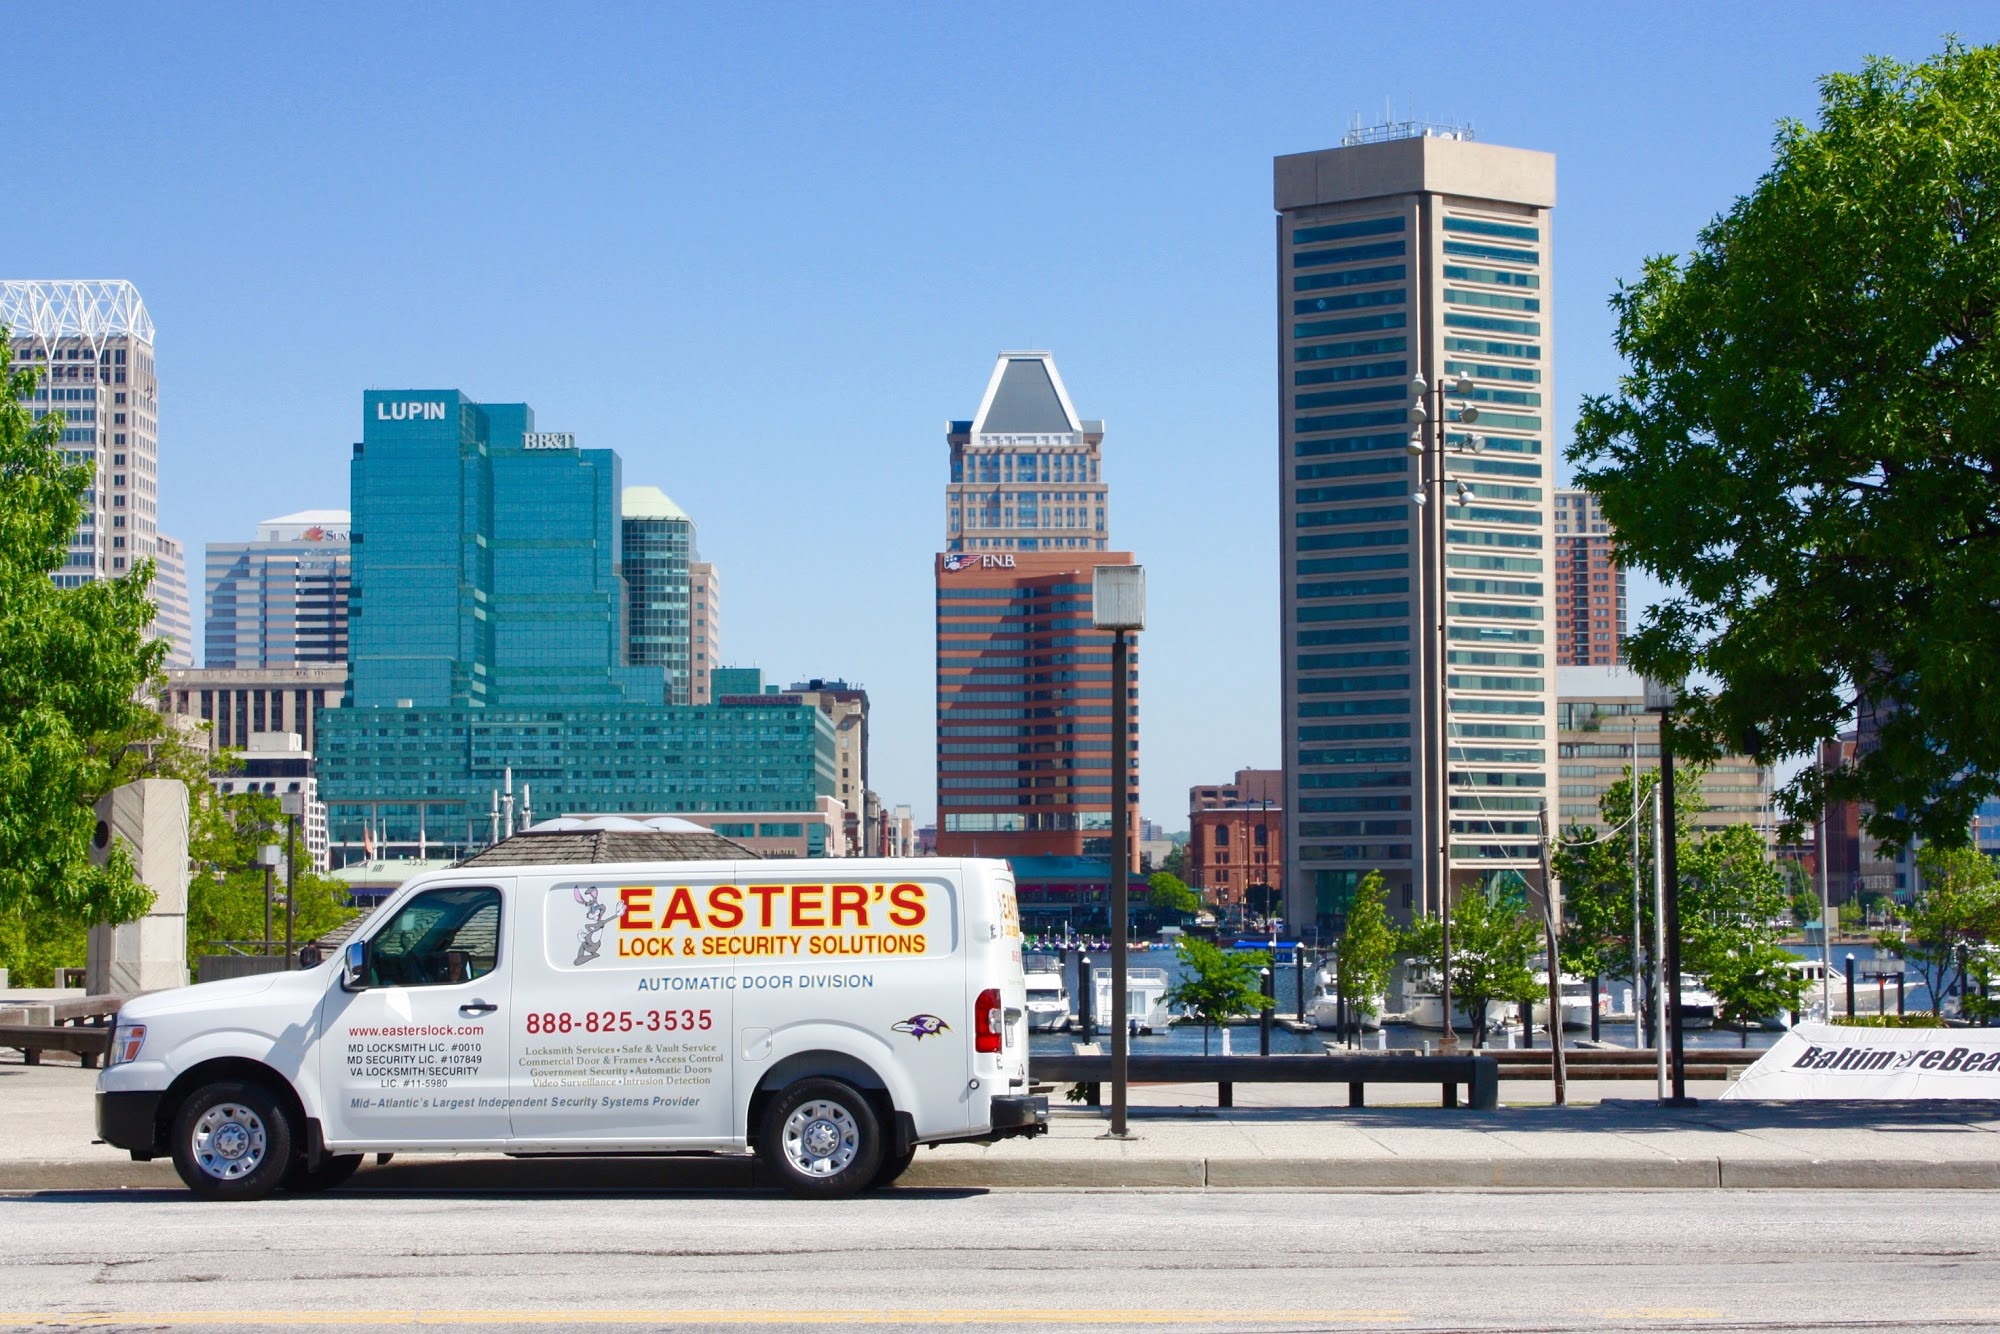 Easter's Lock & Security Solutions - Locksmith Baltimore